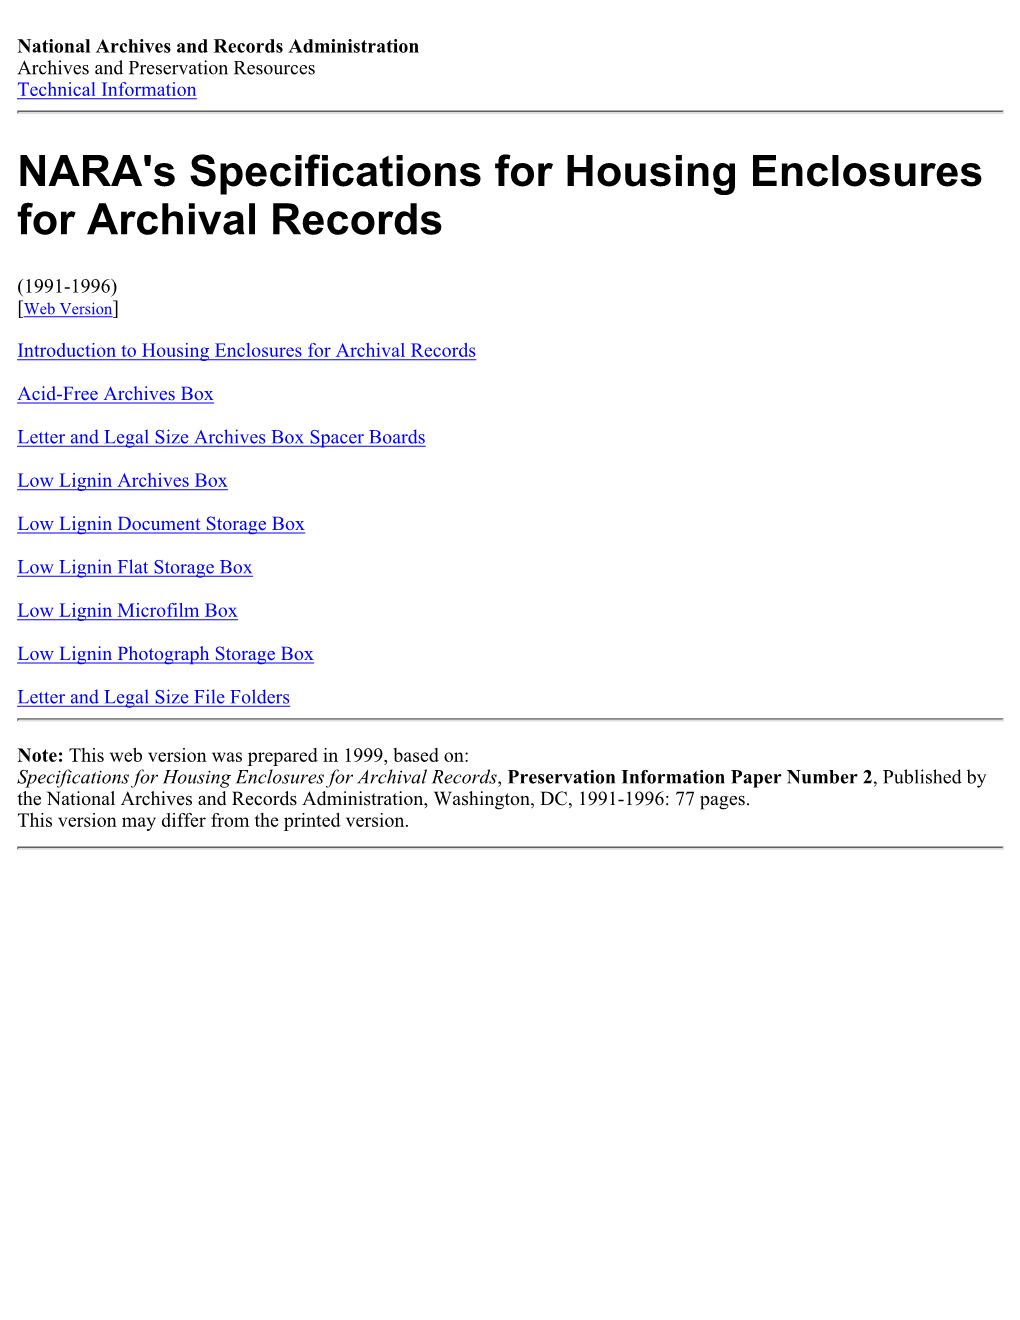 NARA's Specifications for Housing Enclosures for Archival Records